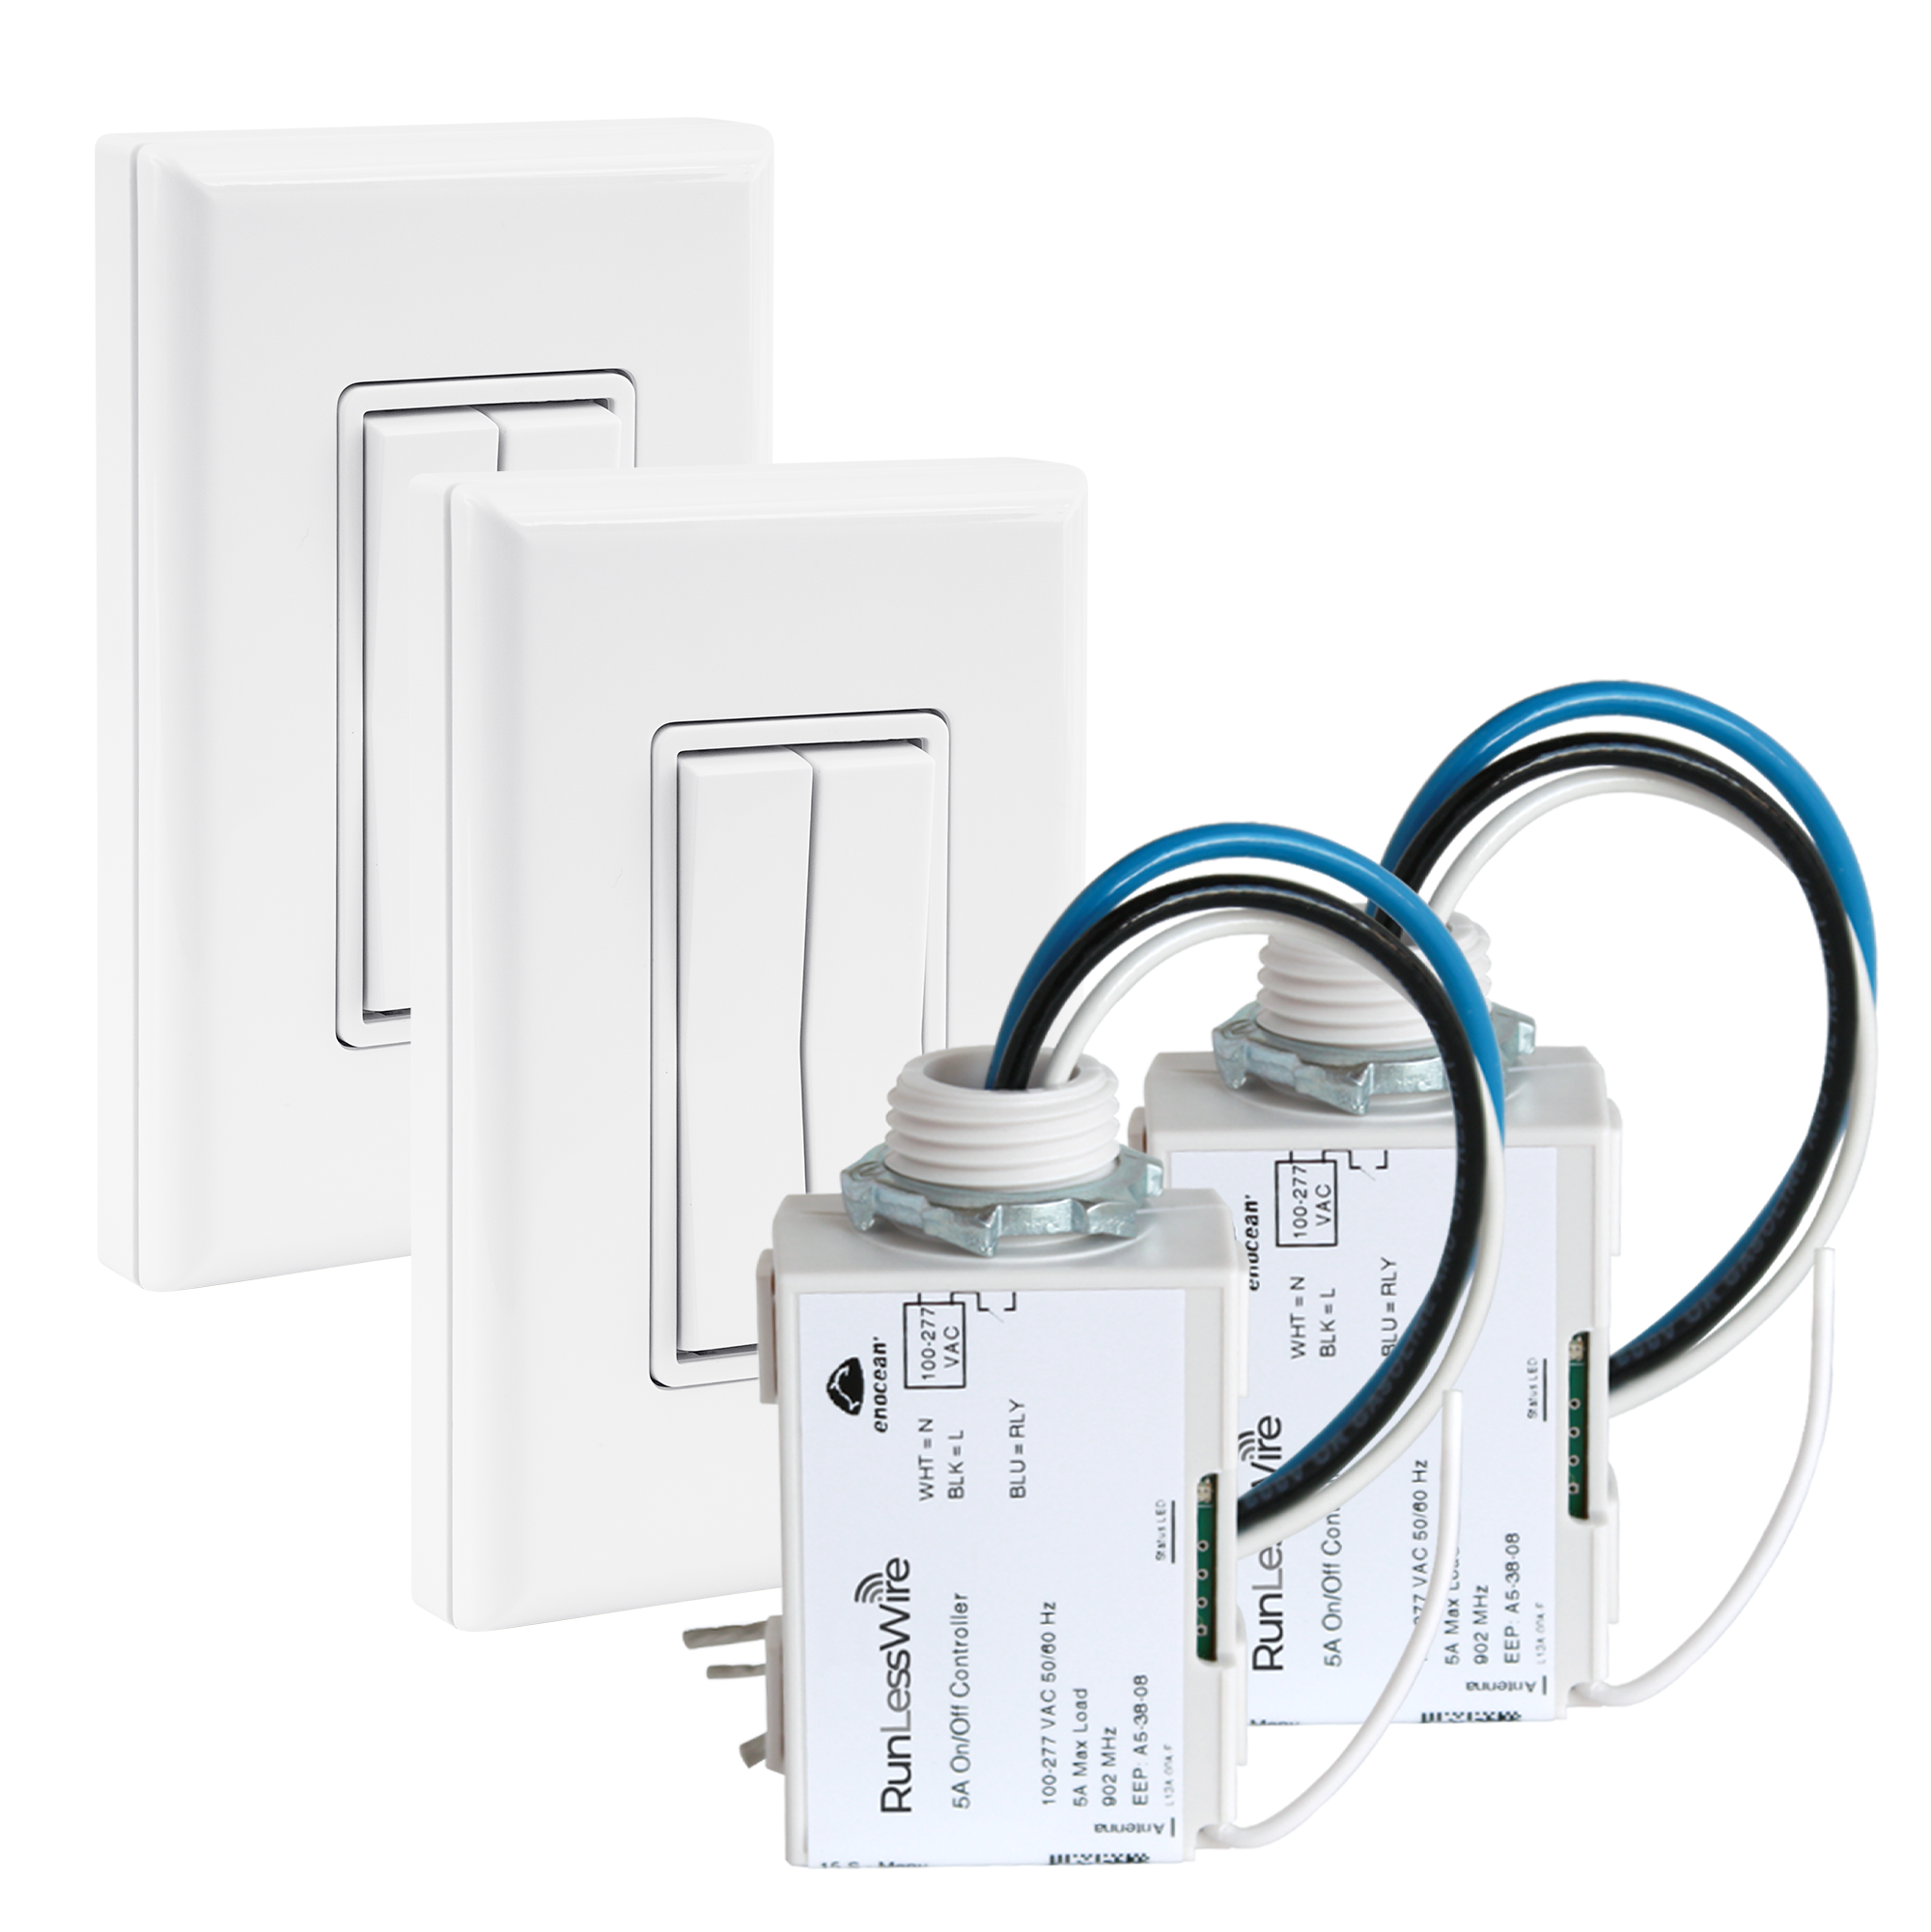 Wireless Light Switch and Receiver Kit, Ortis 300ft RF Range Wireless Wall  Switches for Lights, Fans, Battery Included, No Wiring Needed